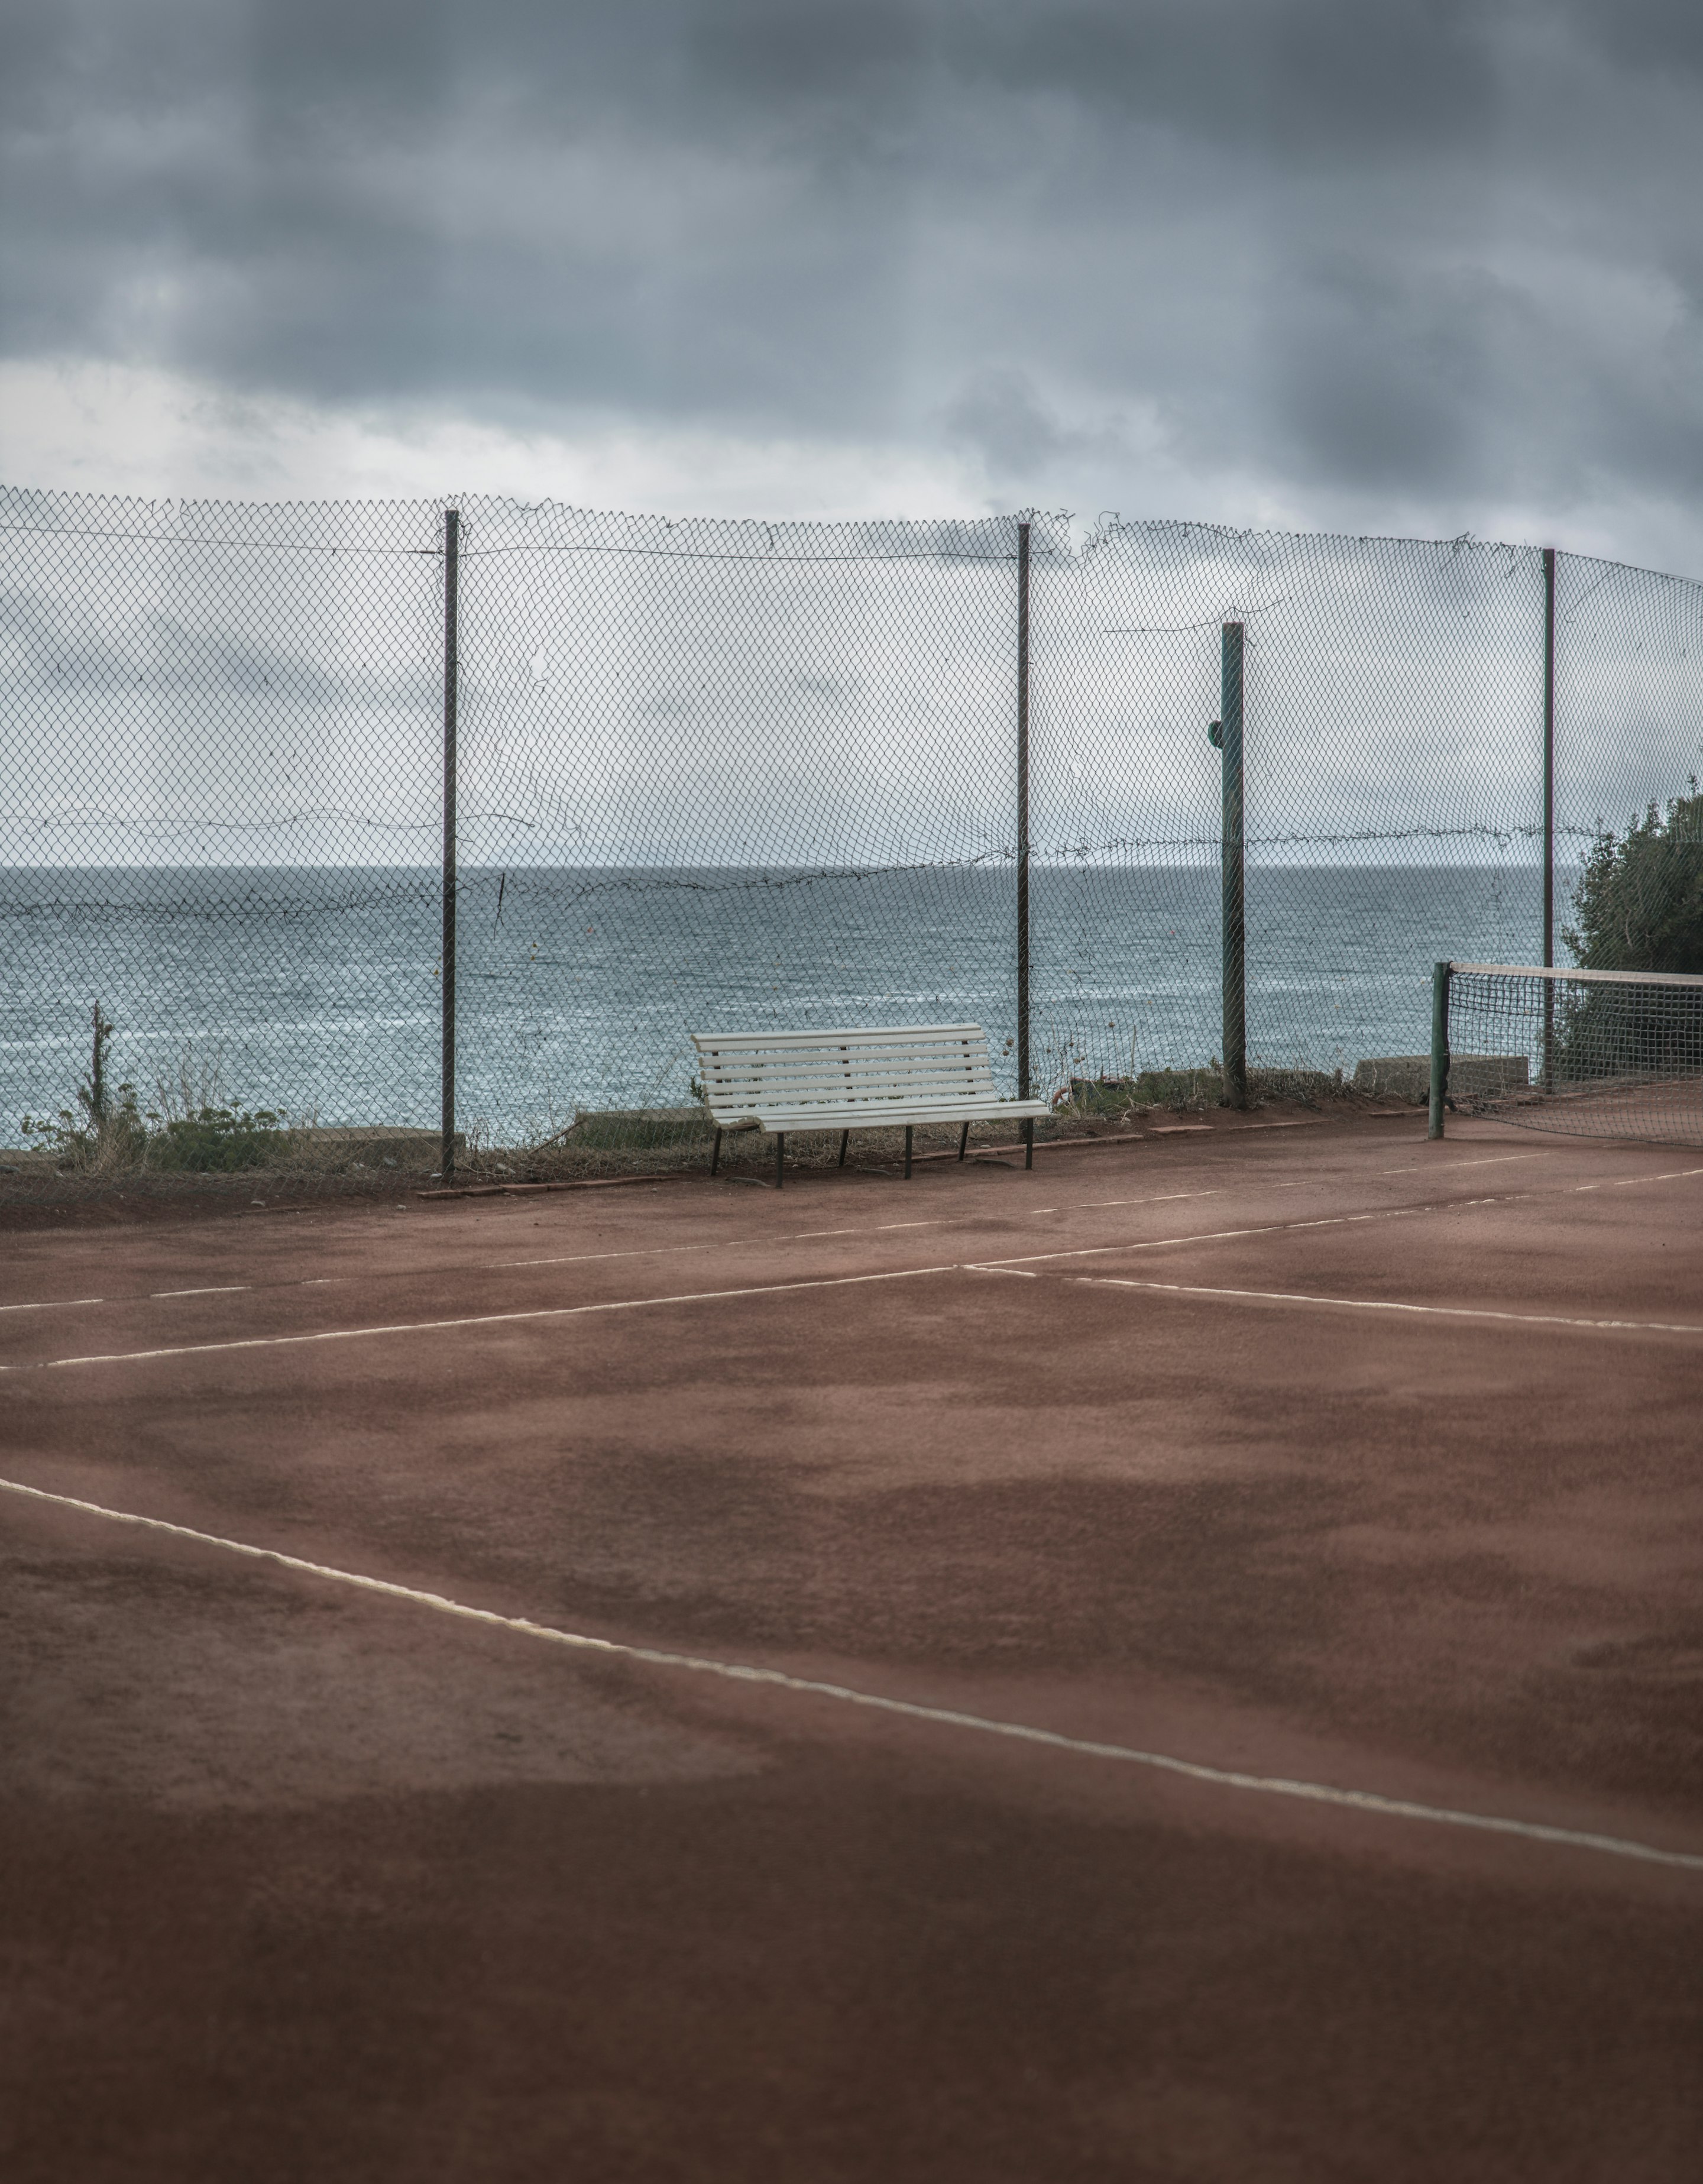 Abandoned sports courts series